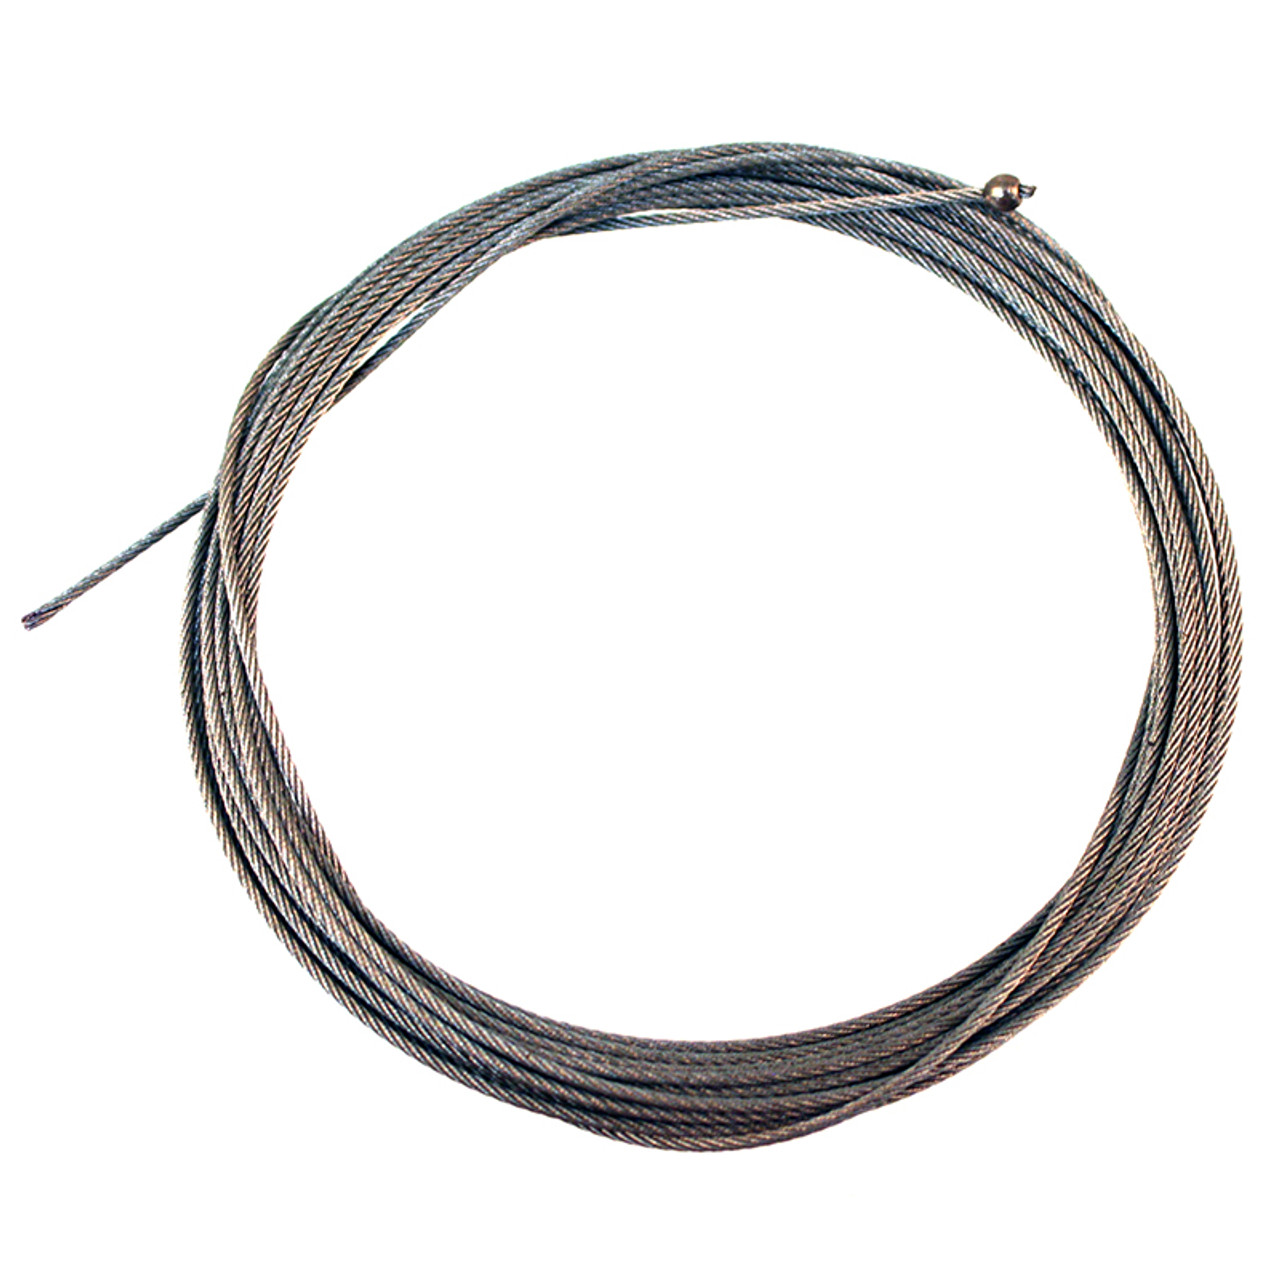 415-52268   ERCOUPE ELEVATOR TRIM CABLE